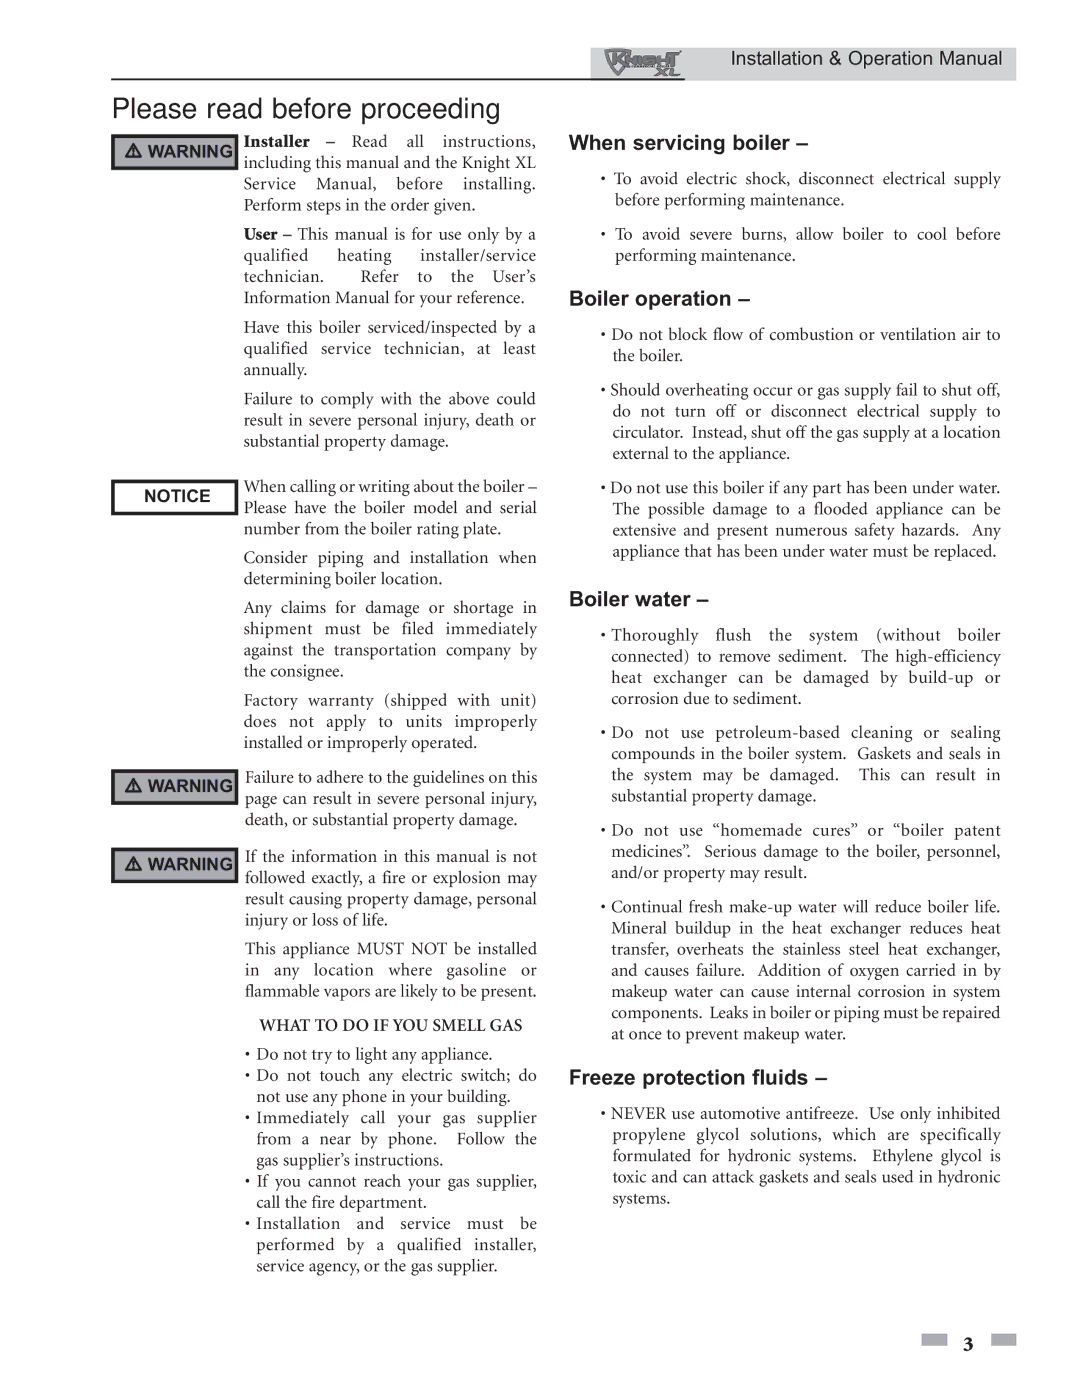 Lochinvar 800 operation manual Please read before proceeding, When servicing boiler 